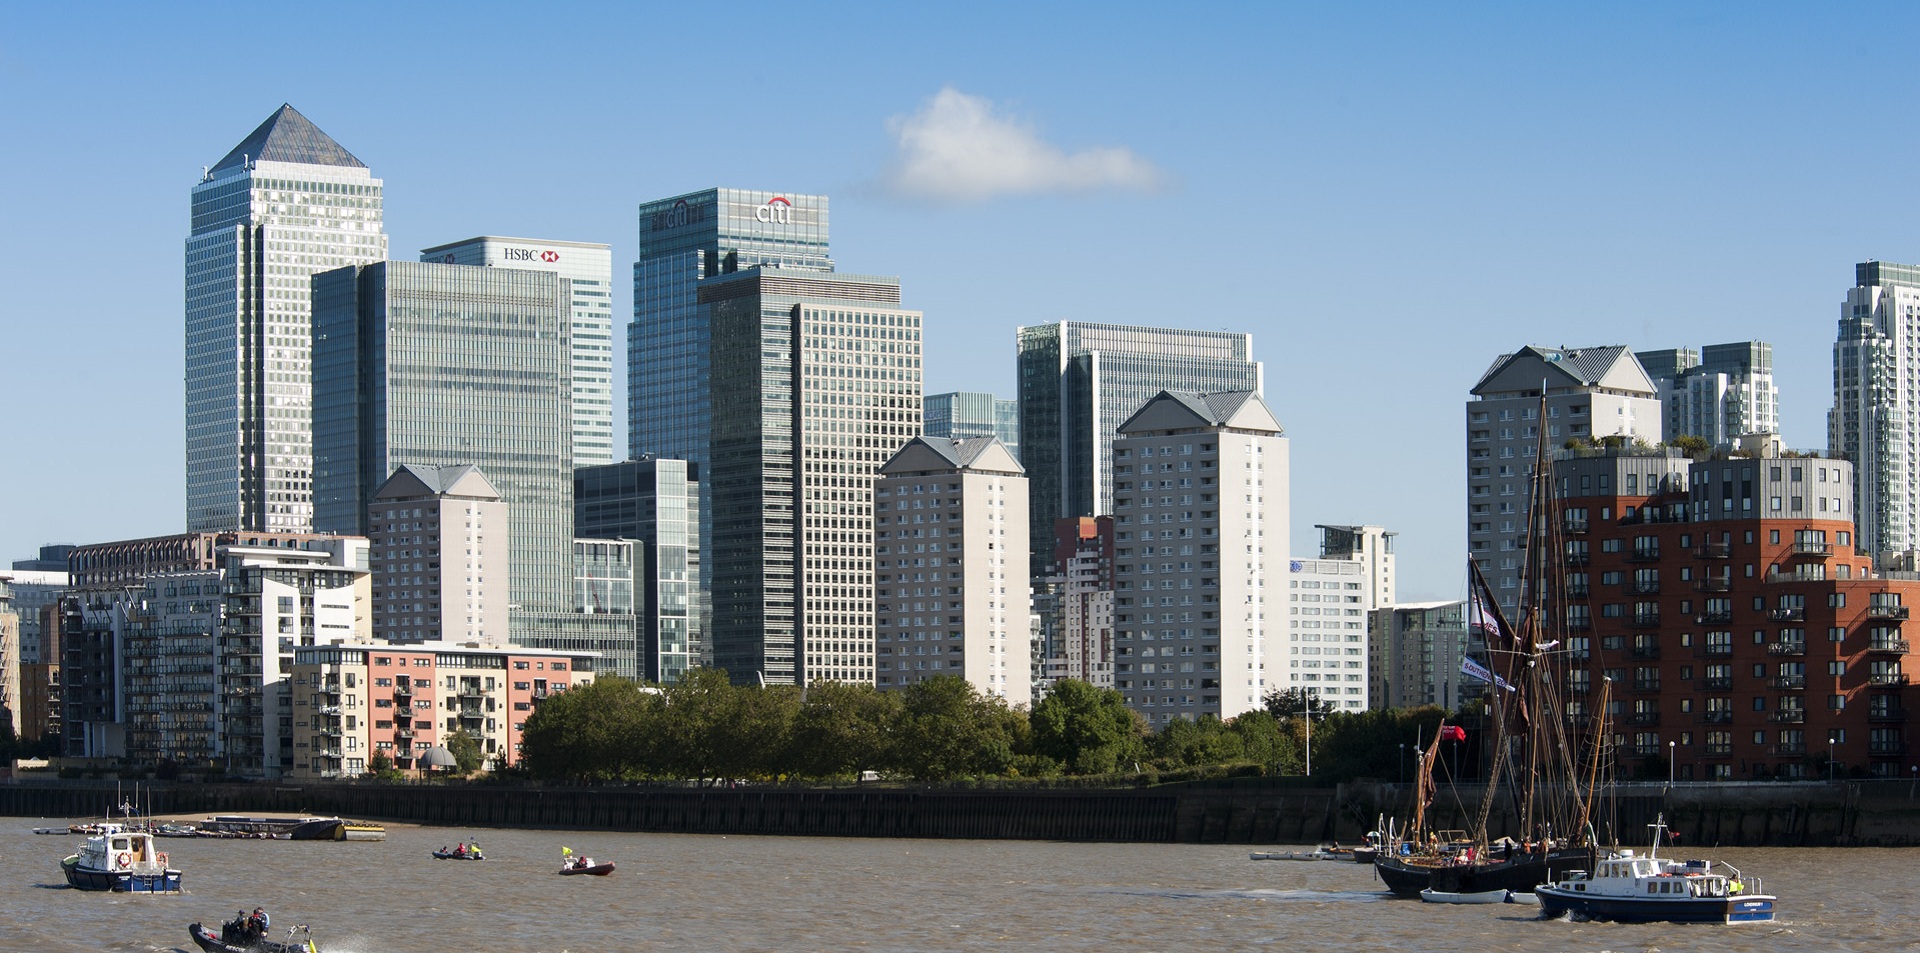 View of Canary Wharf with the Thames in the foreground